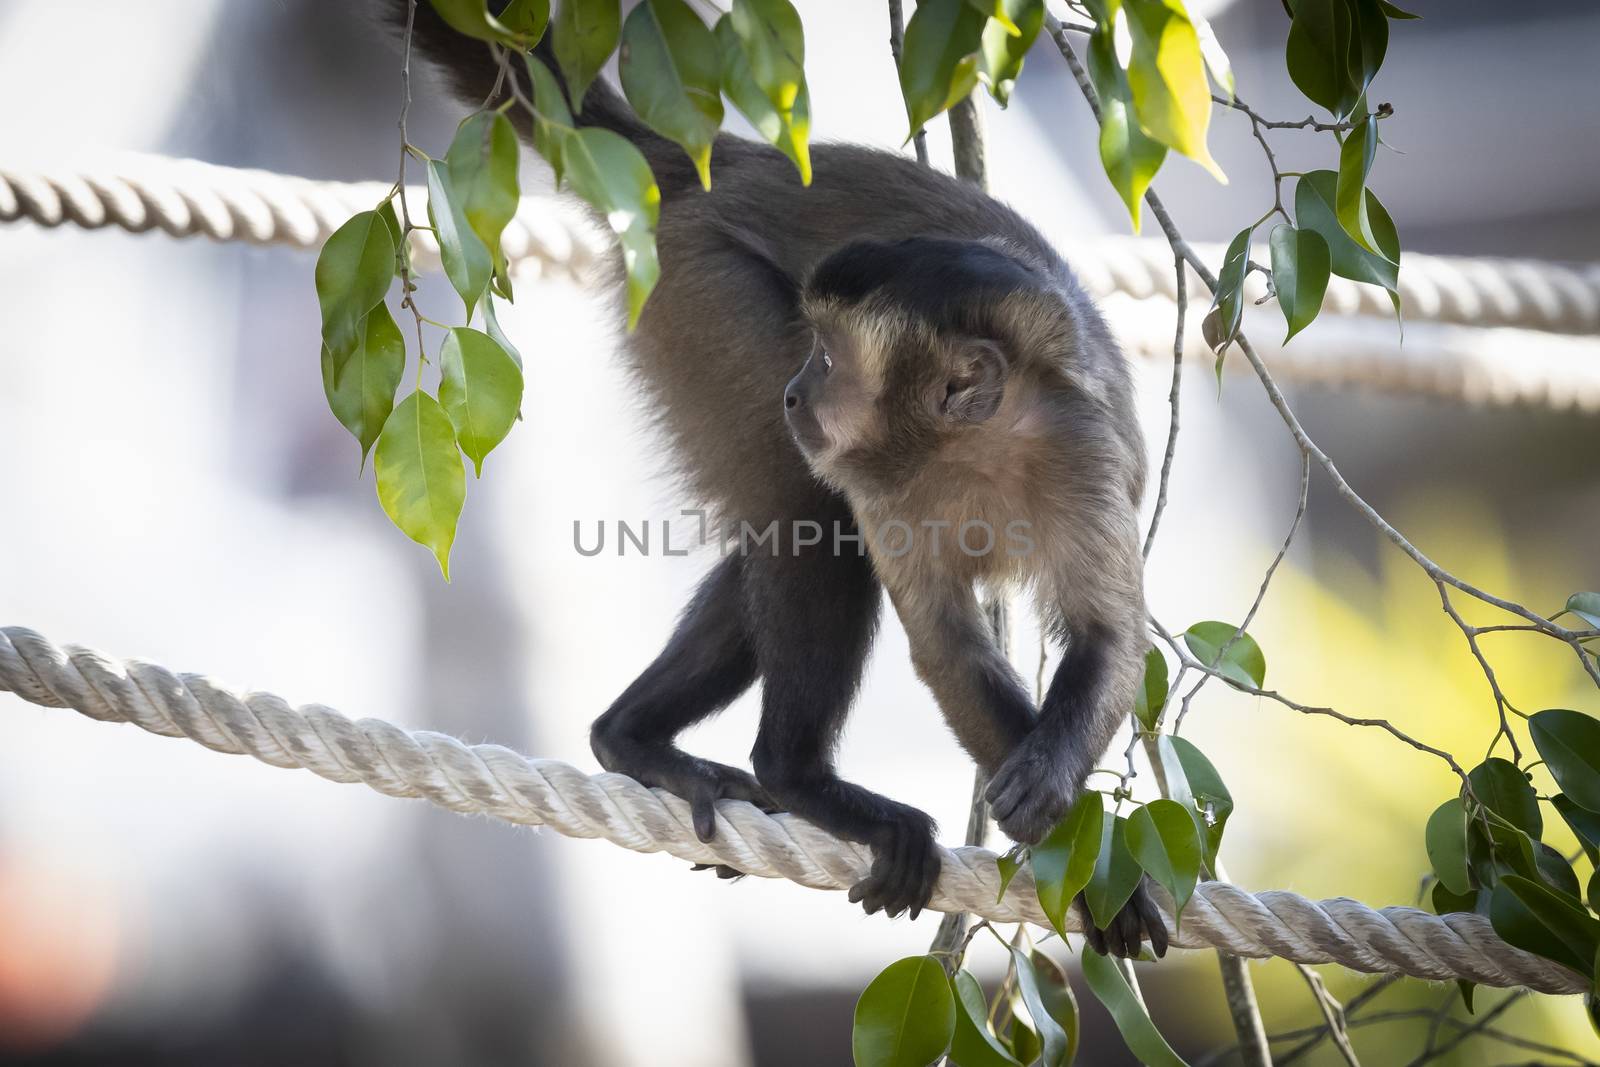 A Tufted Capuchin monkey walking on a rope in the sunshine by WittkePhotos